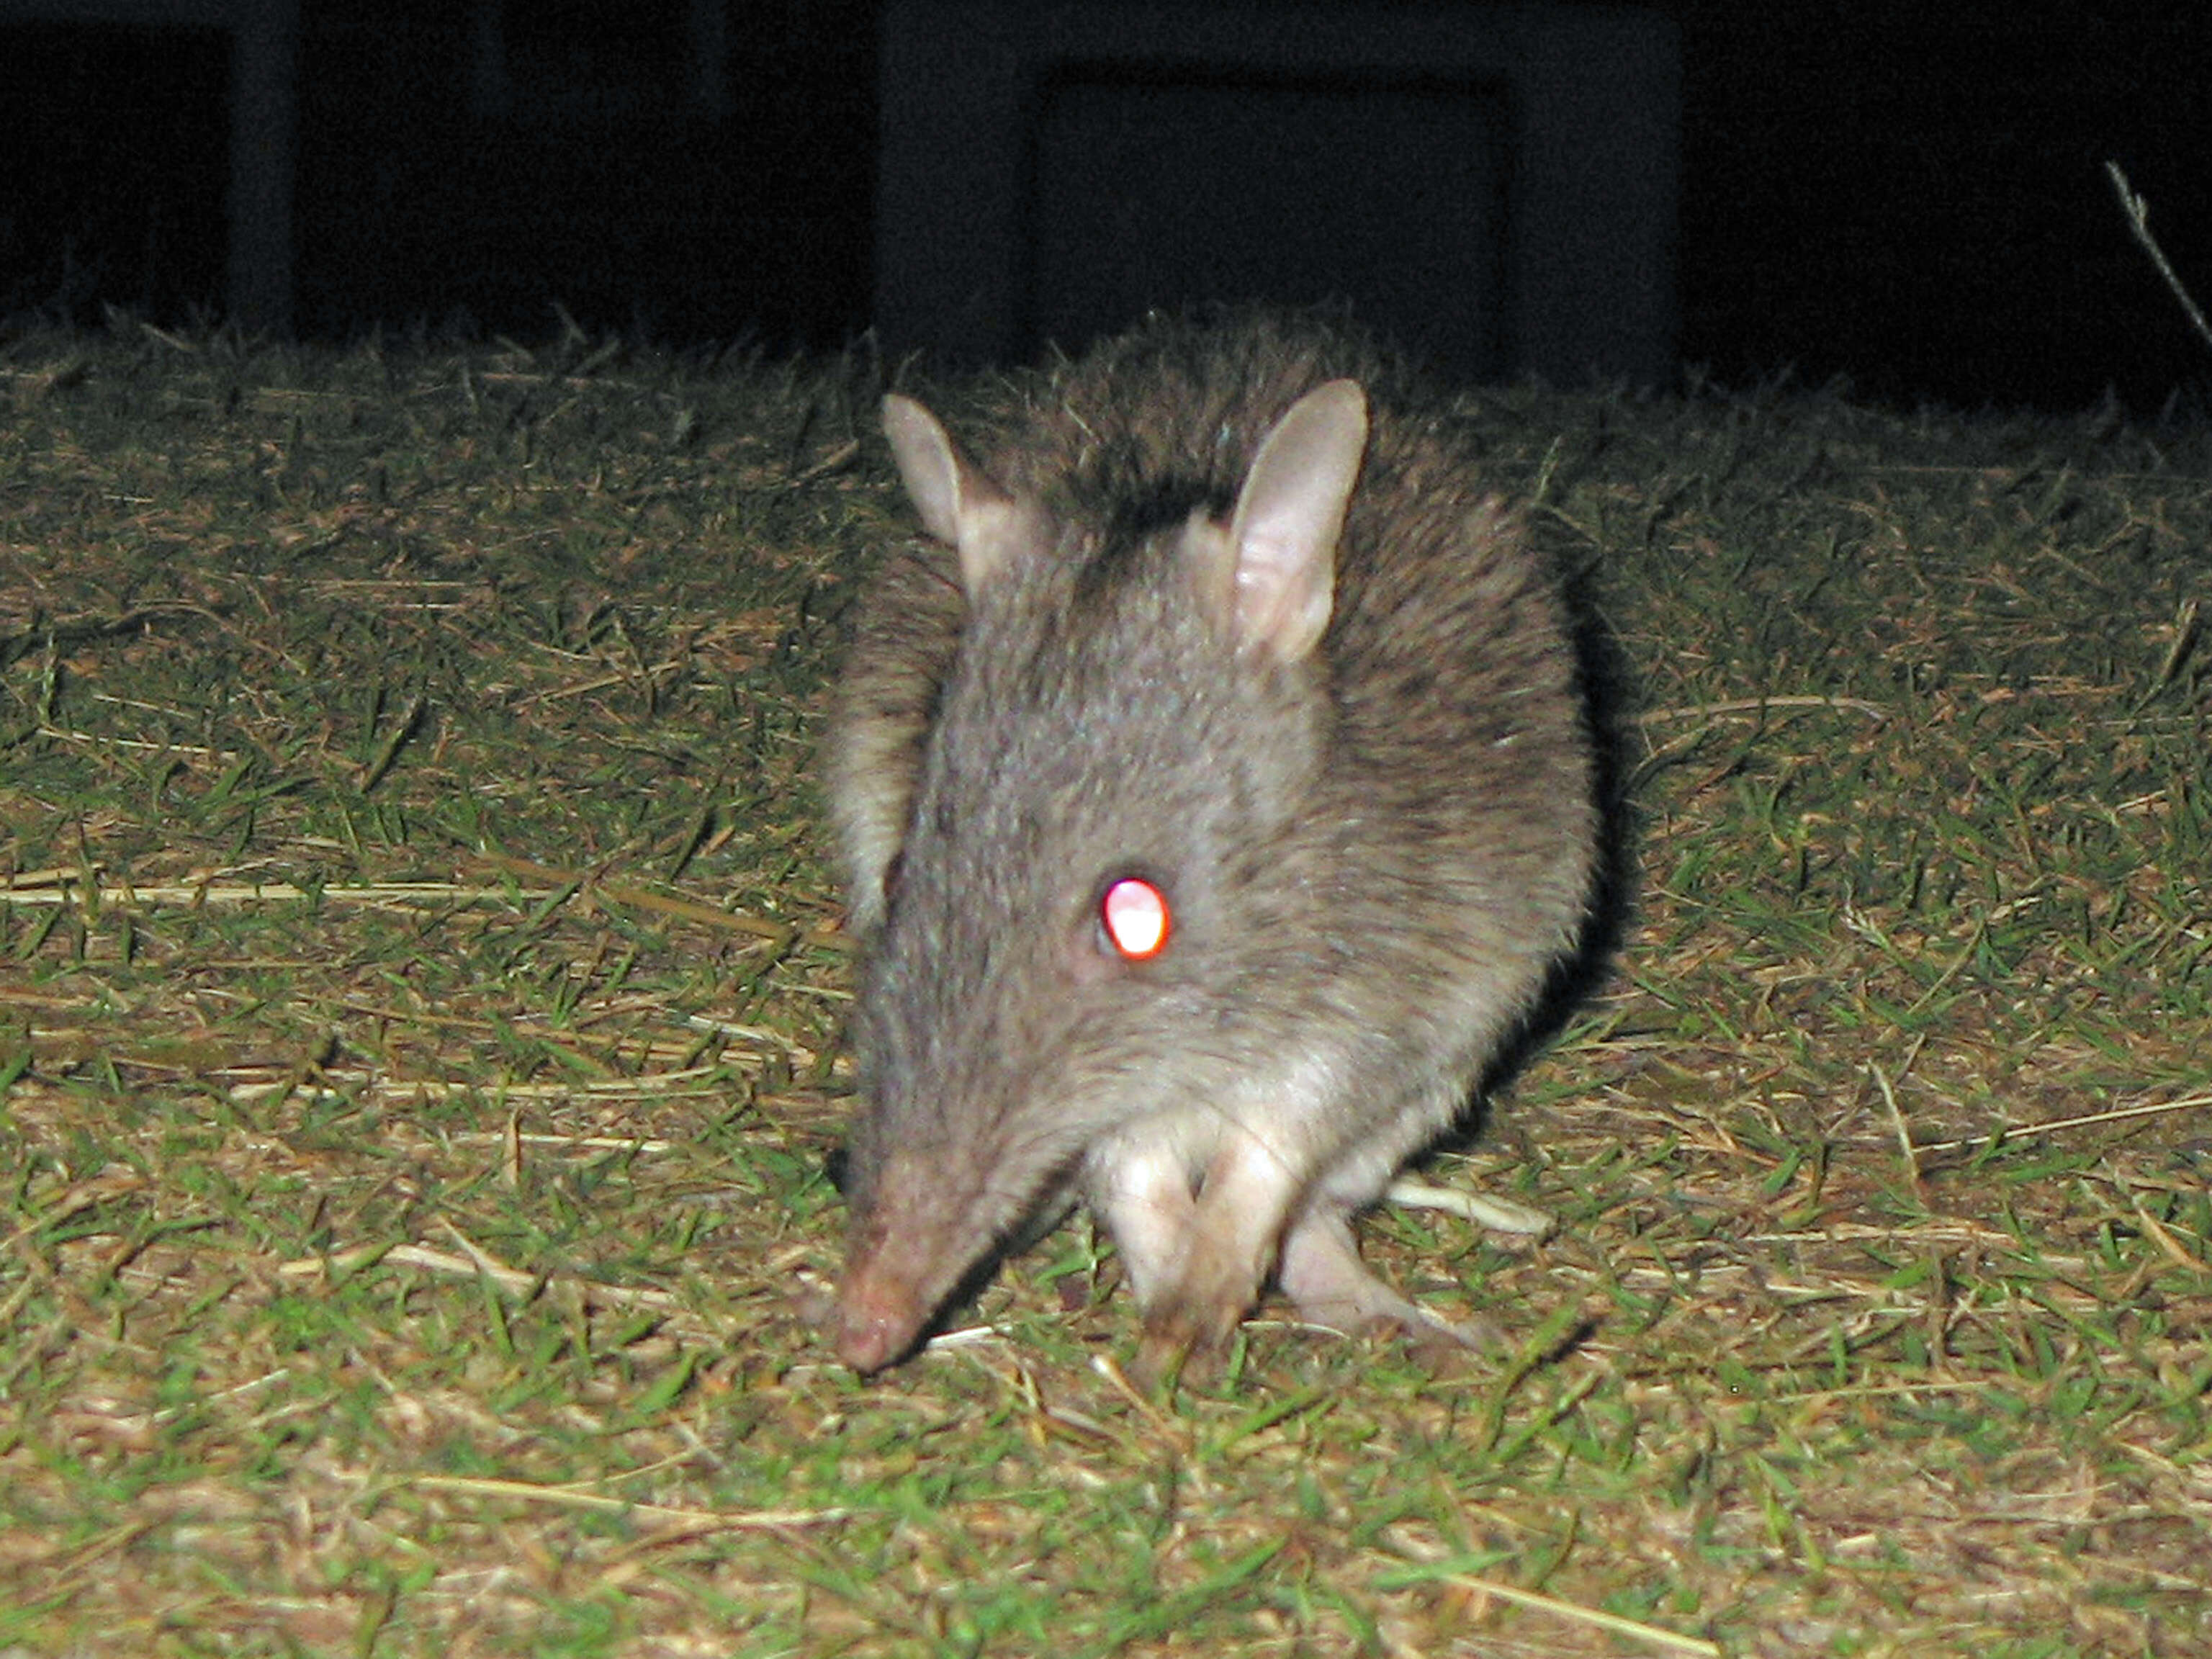 Image of Long-nosed Bandicoot